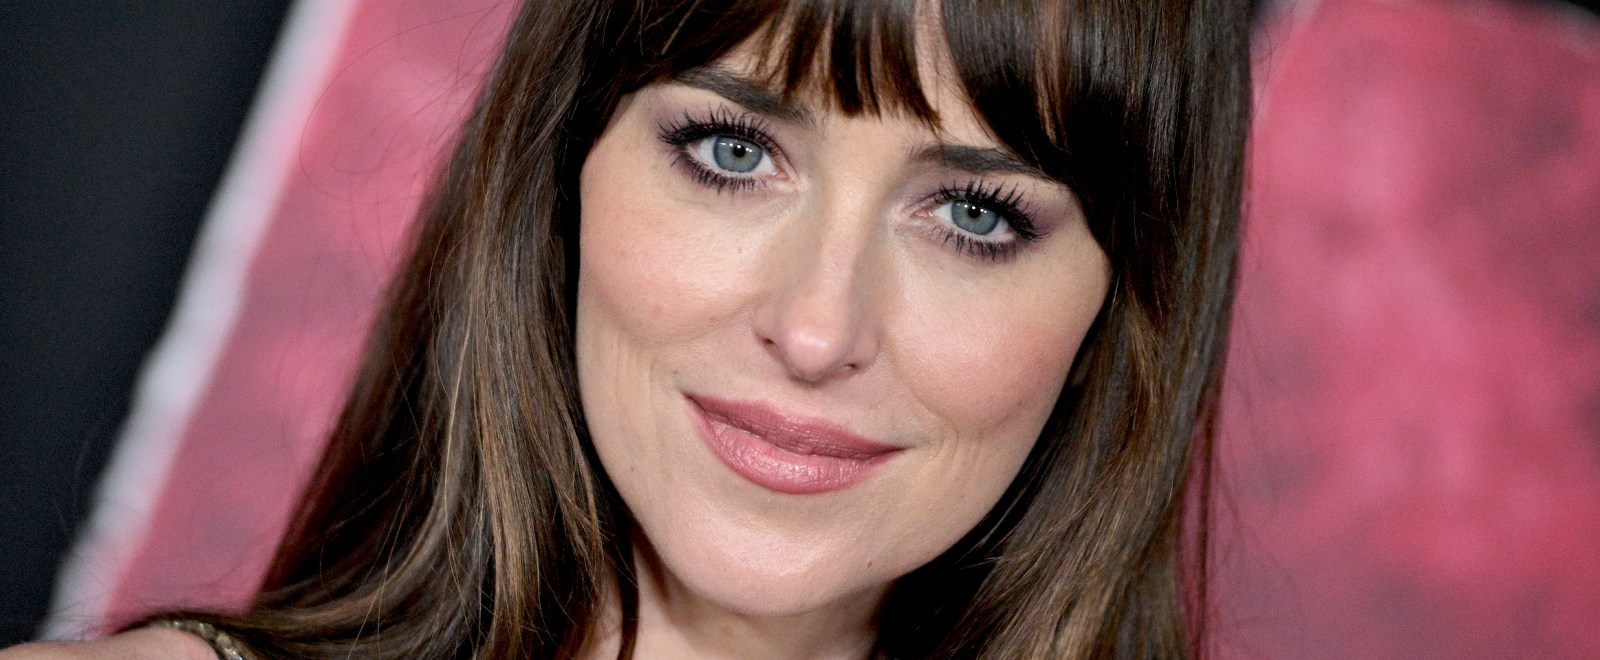 Dakota Johnson Had A Real Hard Time Naming Any Of The MCU ‘Spider-Man’ Movies